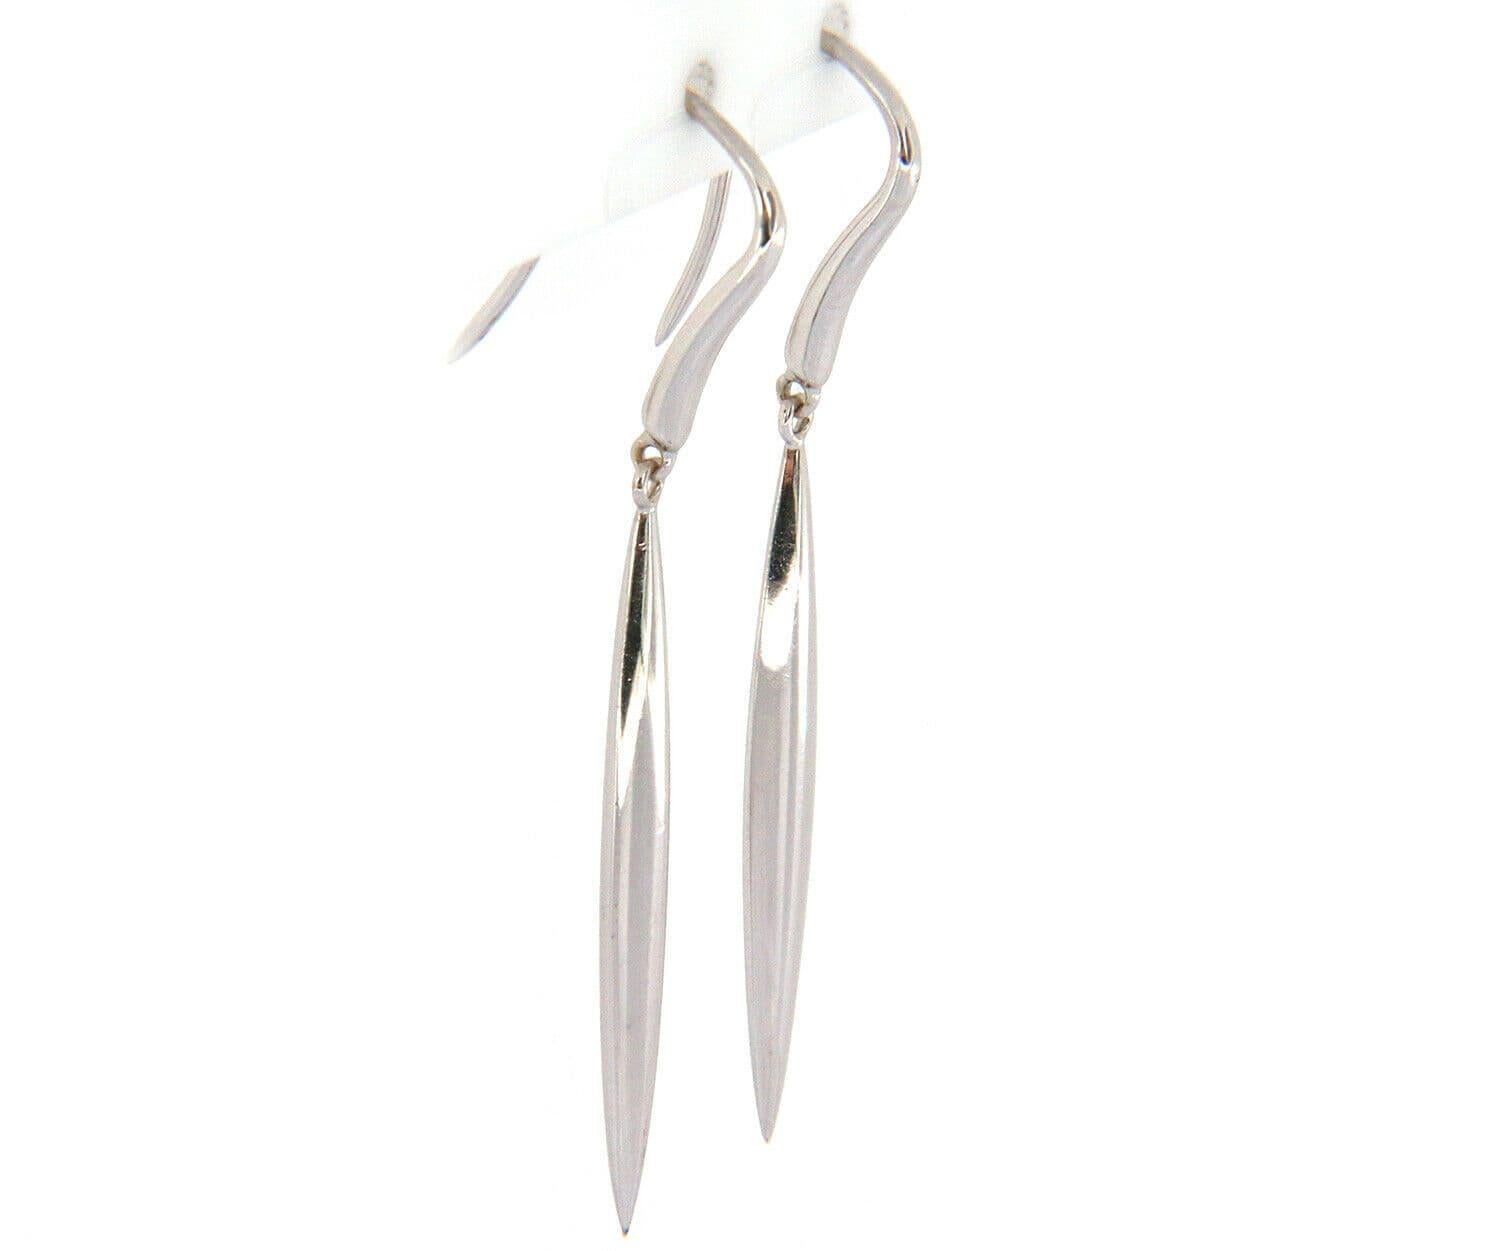 Tiffany & Co. Feather Hook Dangle Earrings in 18K W/Box

Tiffany & Co. Feather Hook Dangle Earrings
18K White Gold
Earring Length: Approx. 47.0 MM
Weight: Approx. 5.69 Grams
Stamped: ©T & CO., 750
Original Inner Box

Condition:
Offered for your